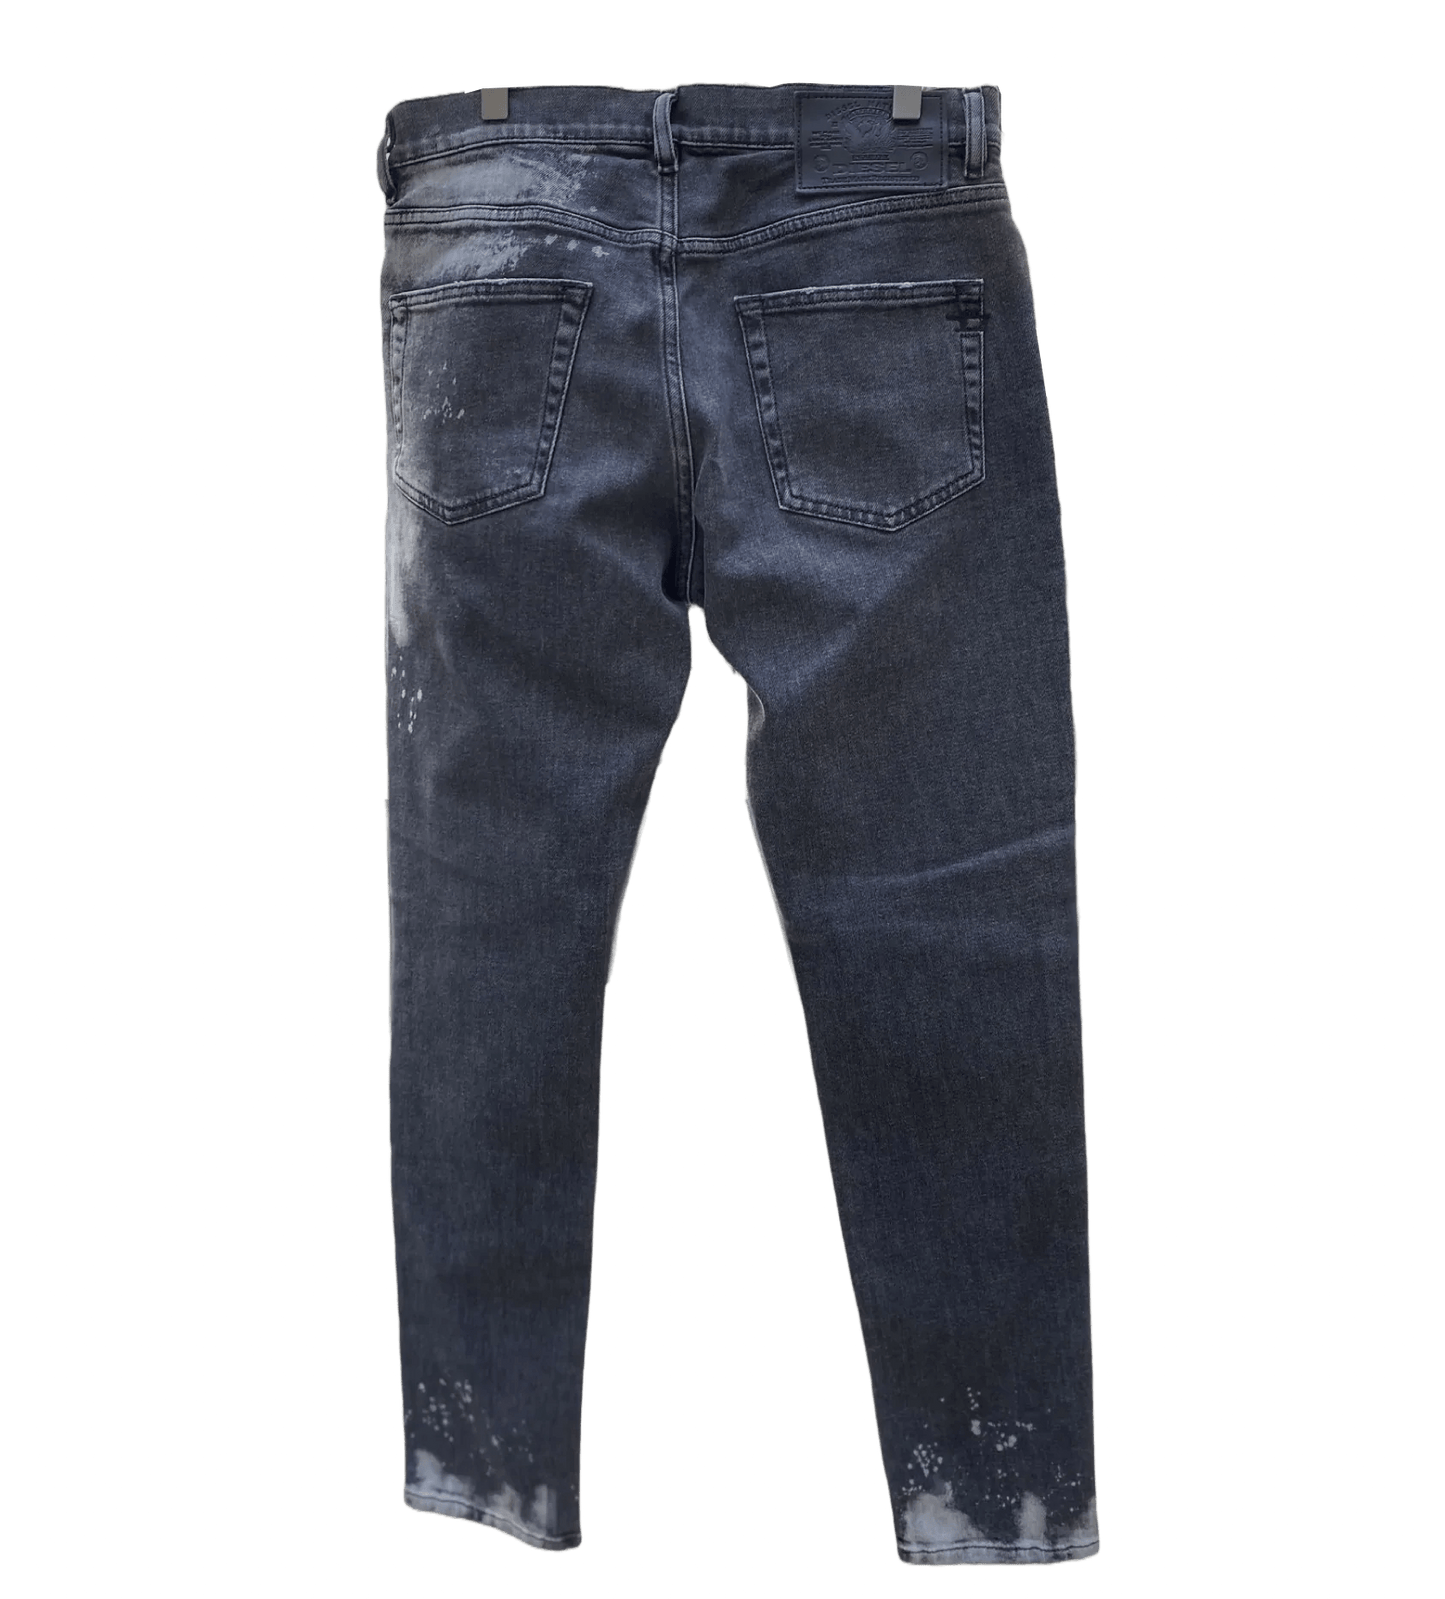 A pair of grey faded DIESEL D-STRUKT-SP17 09RE jeans with holes in them.